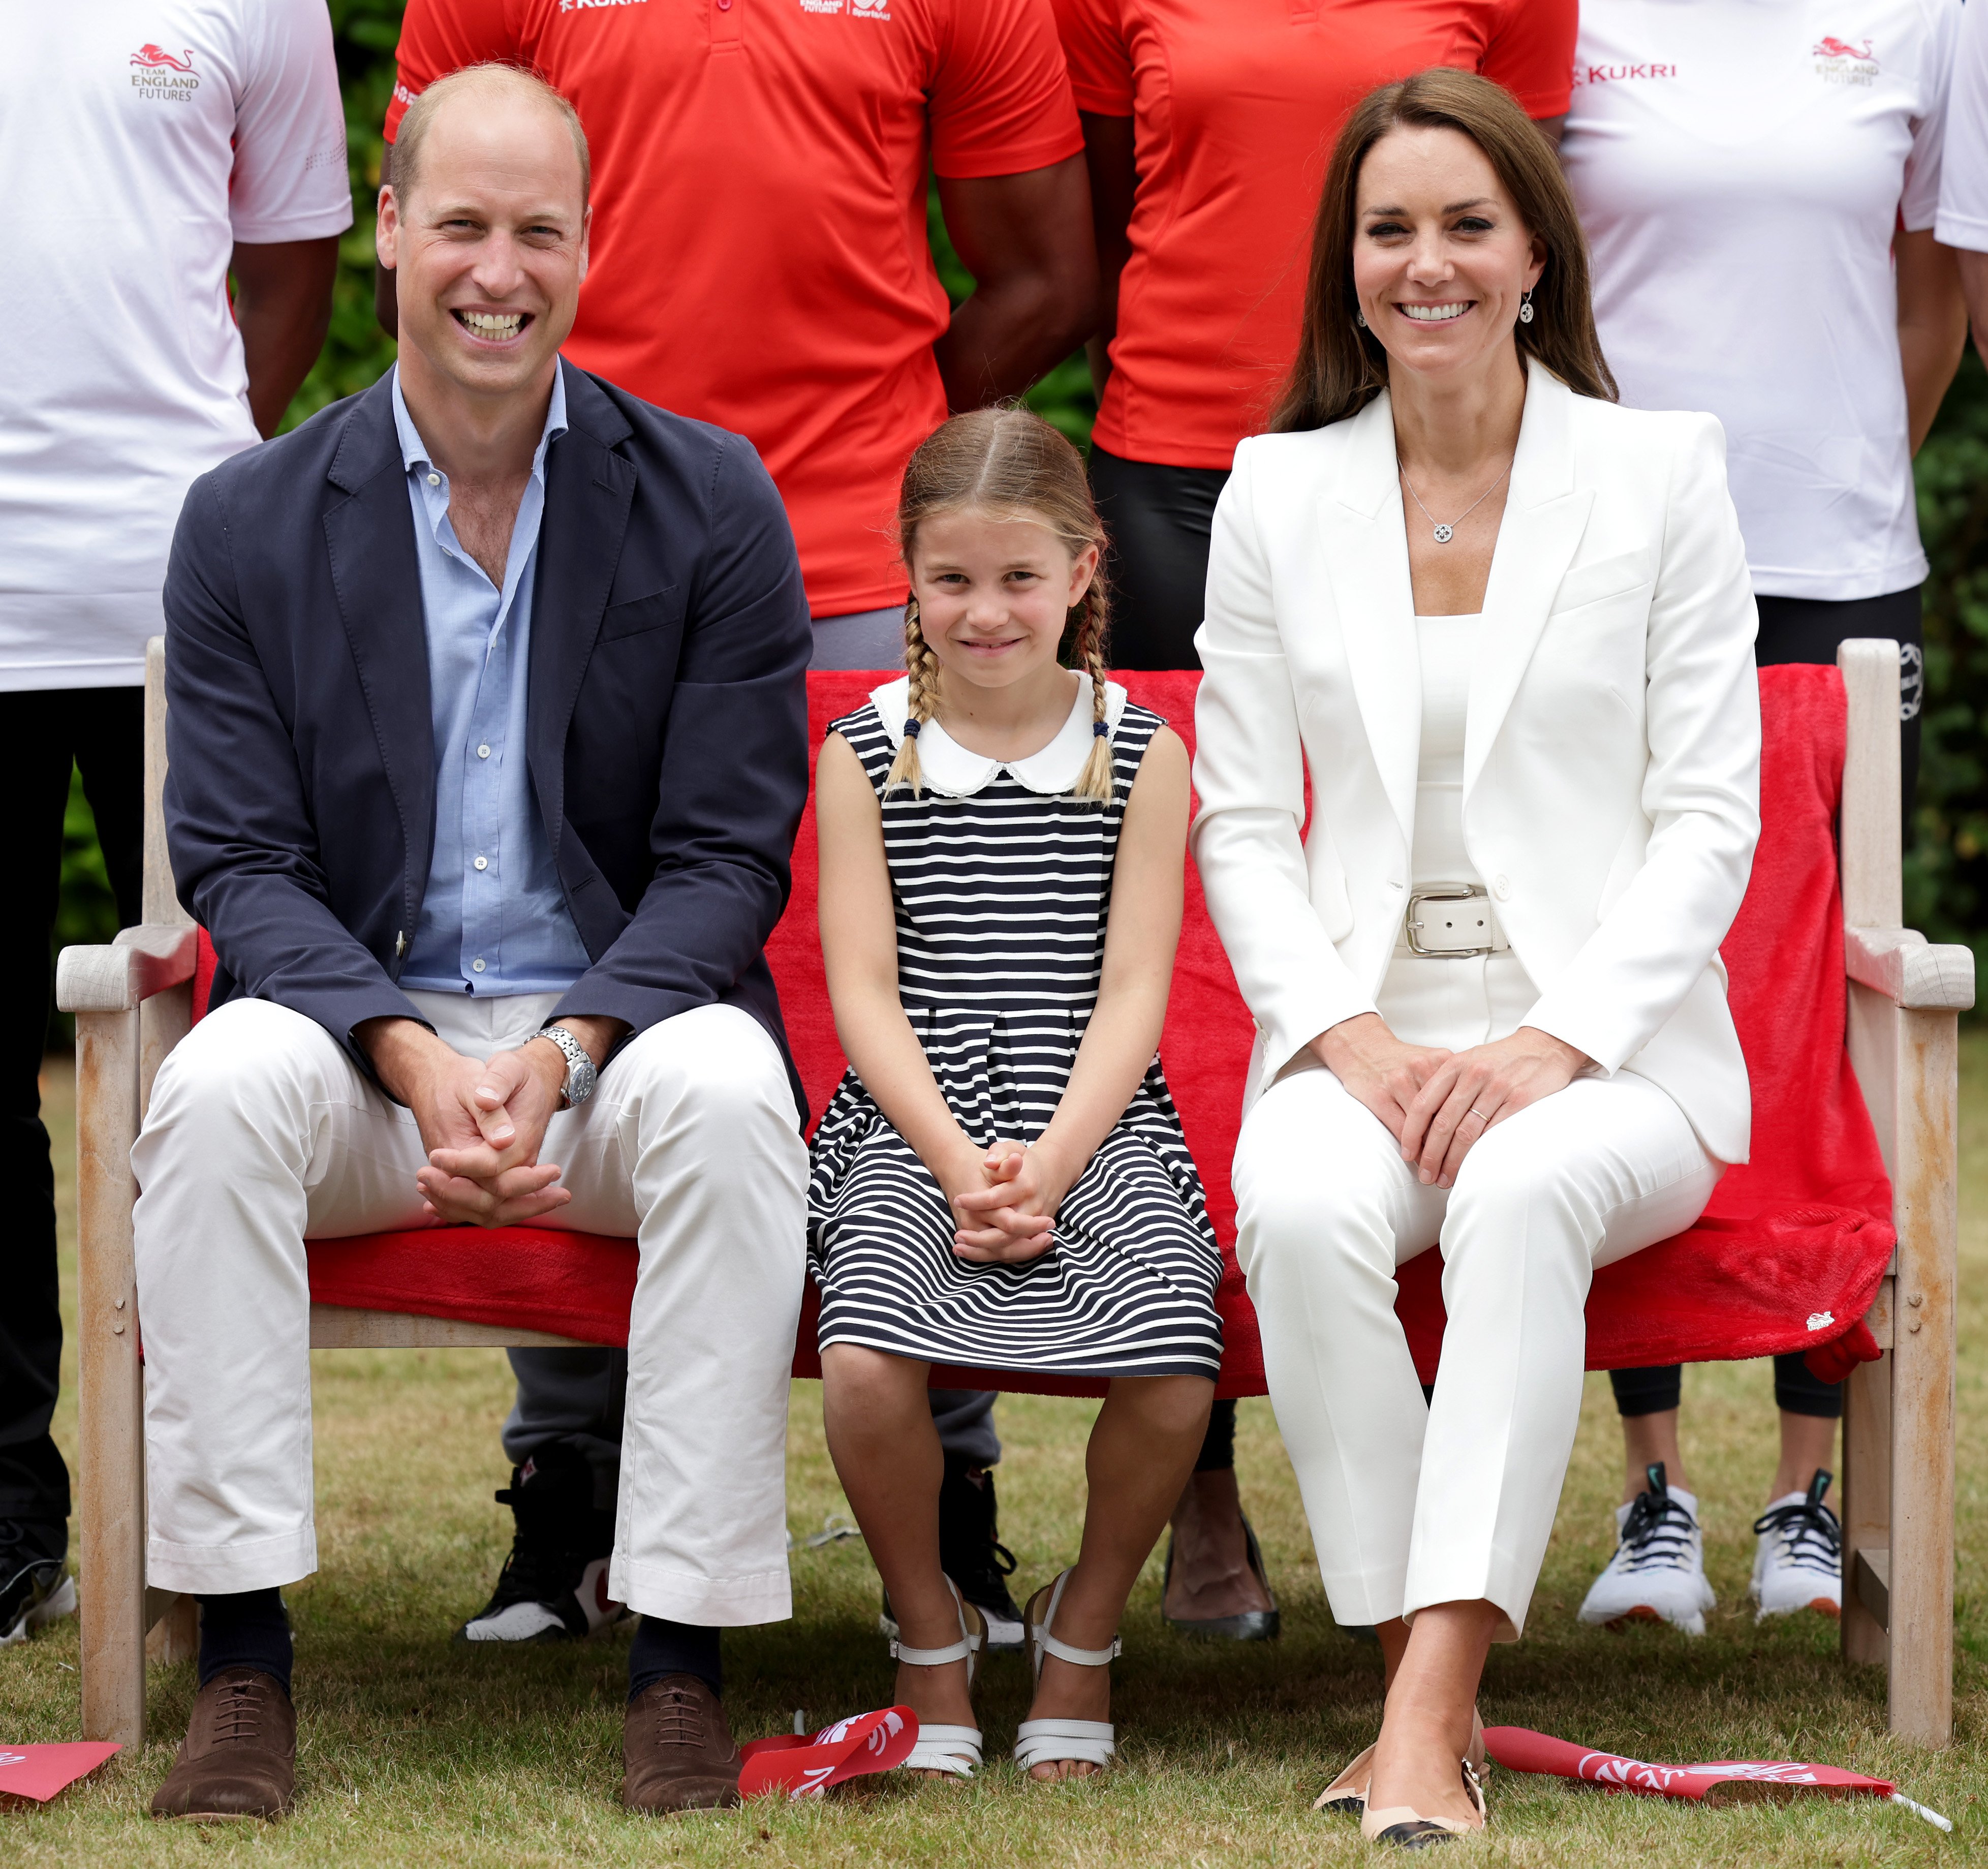 Prince William,Kate Middleton and Princess Charlotte pose for a photograph as they visit Sportsid House at the 2022 Commonwealth Games on August 02, 2022 in Birmingham, England | Source: Getty Images